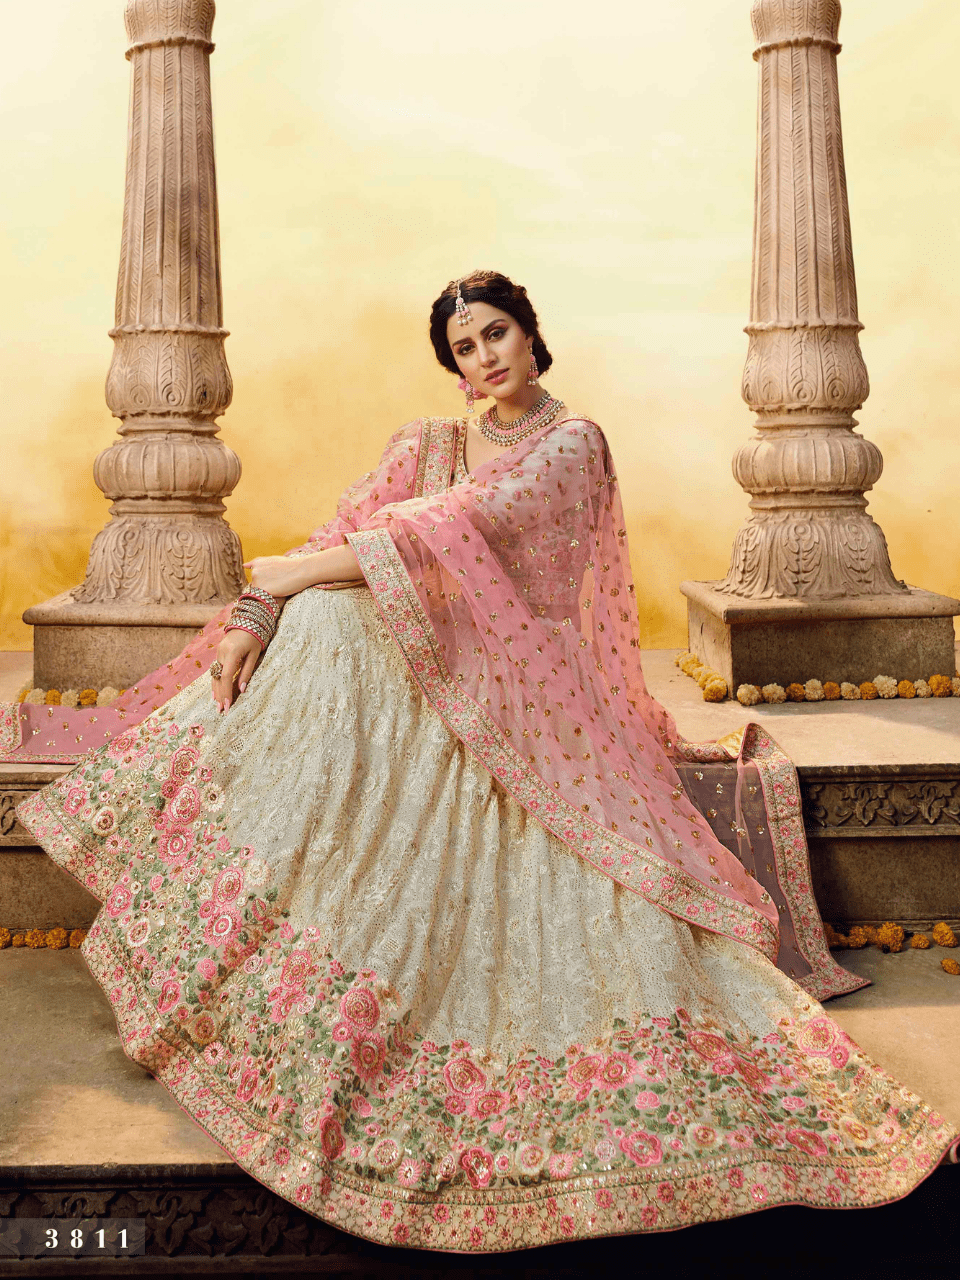 Buy White Silk Floral Embroidered Lehenga Choli With Pink Dupatta